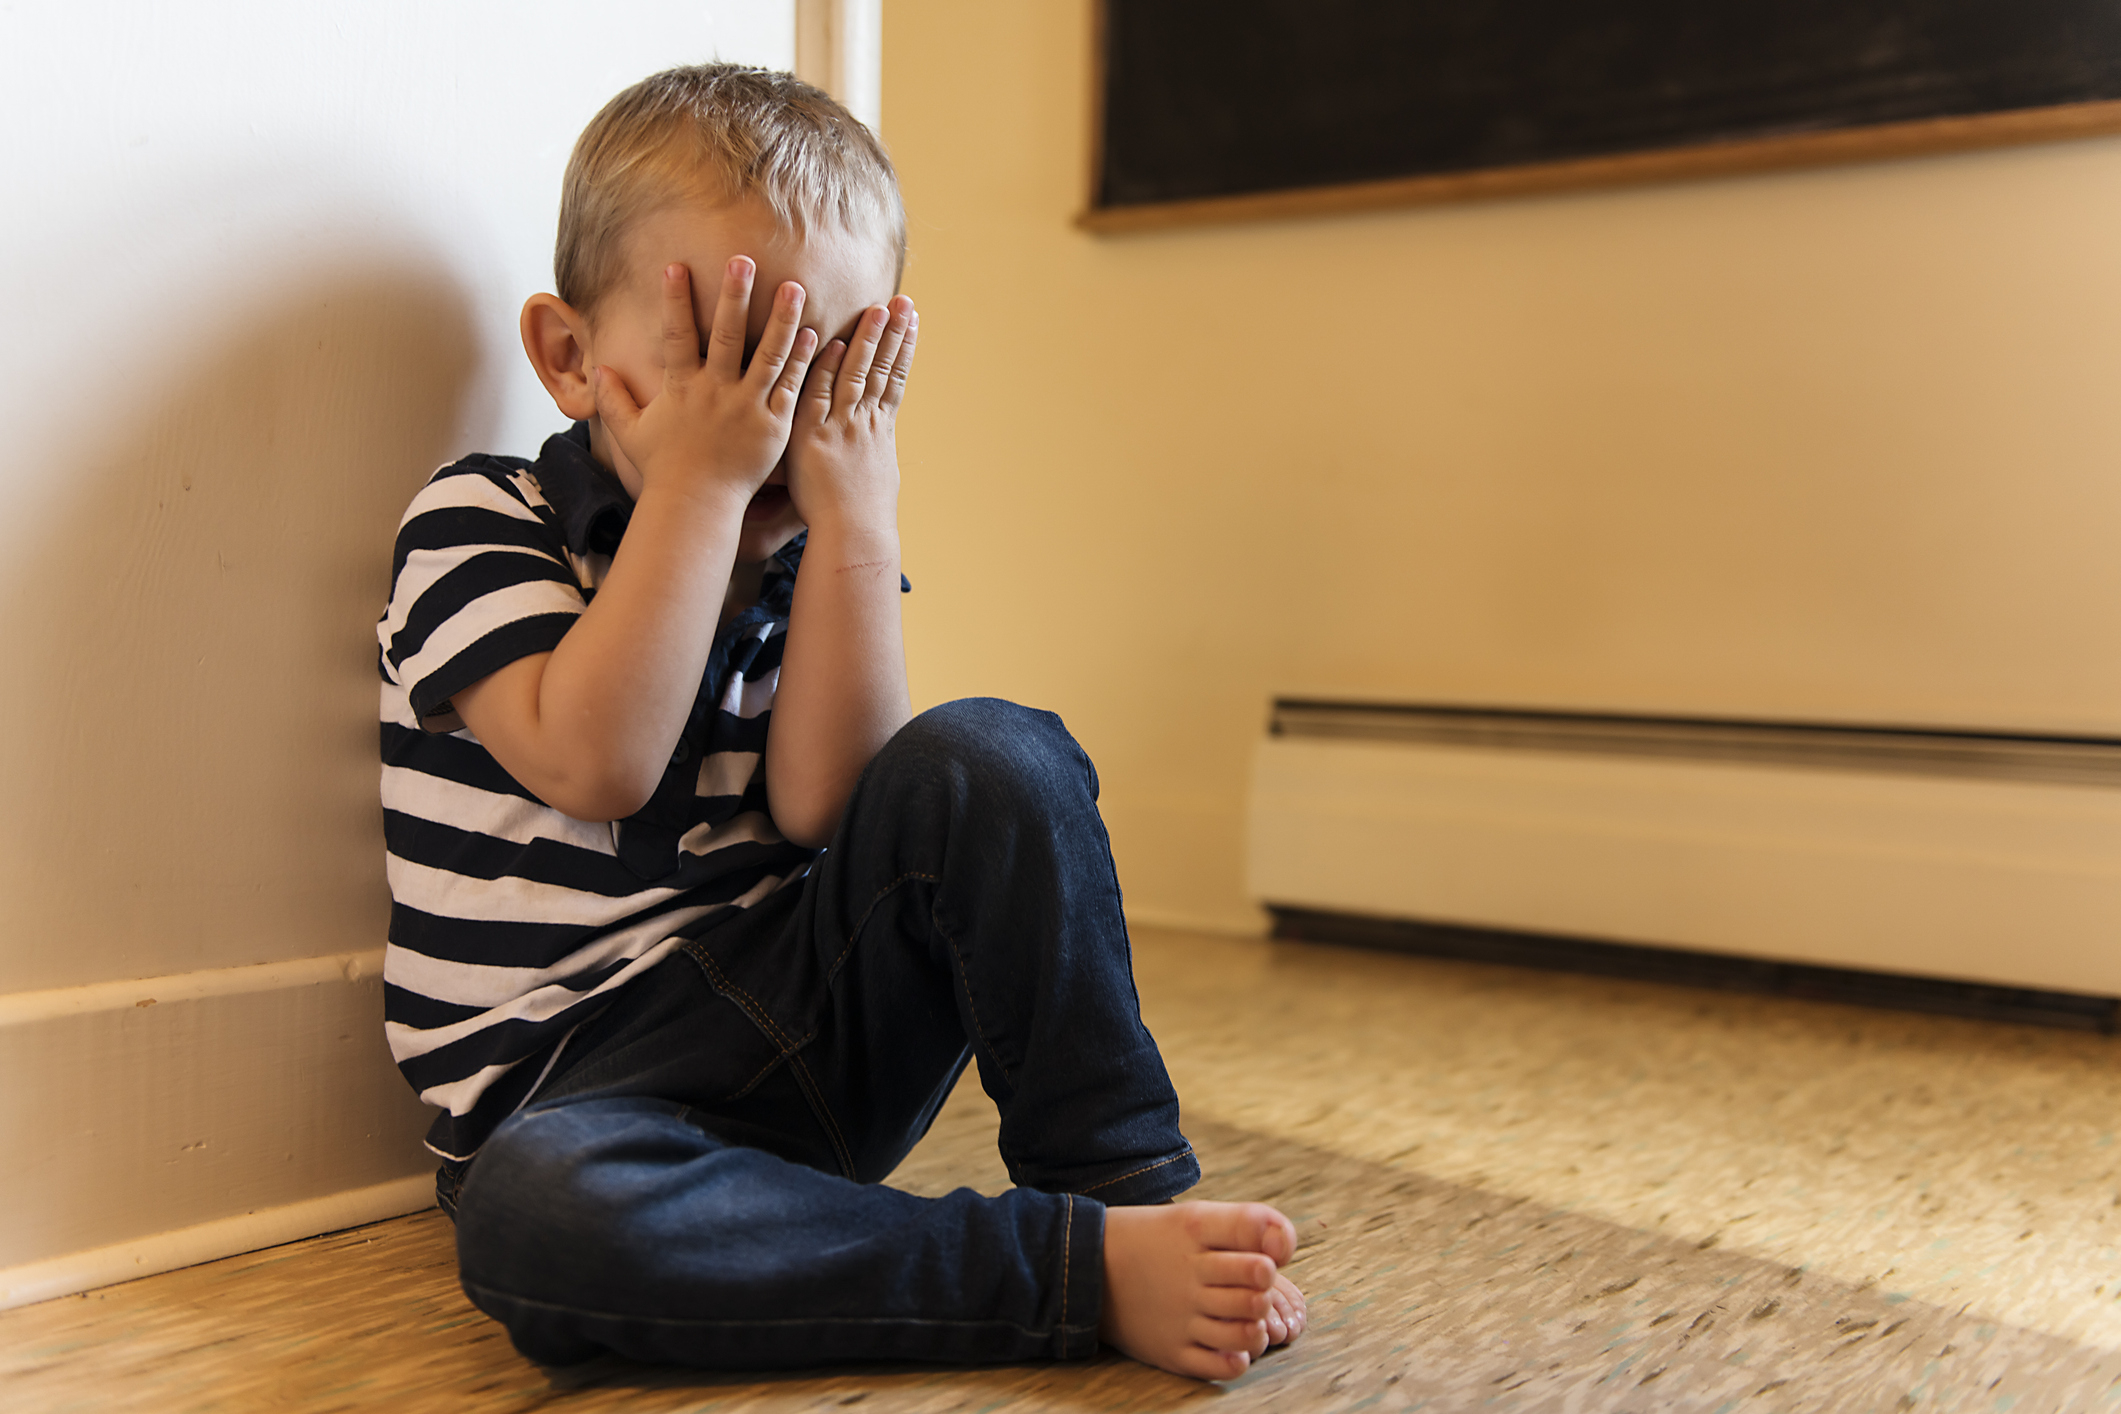 Child sitting on floor with hands covering face, appears upset or playing hide and seek